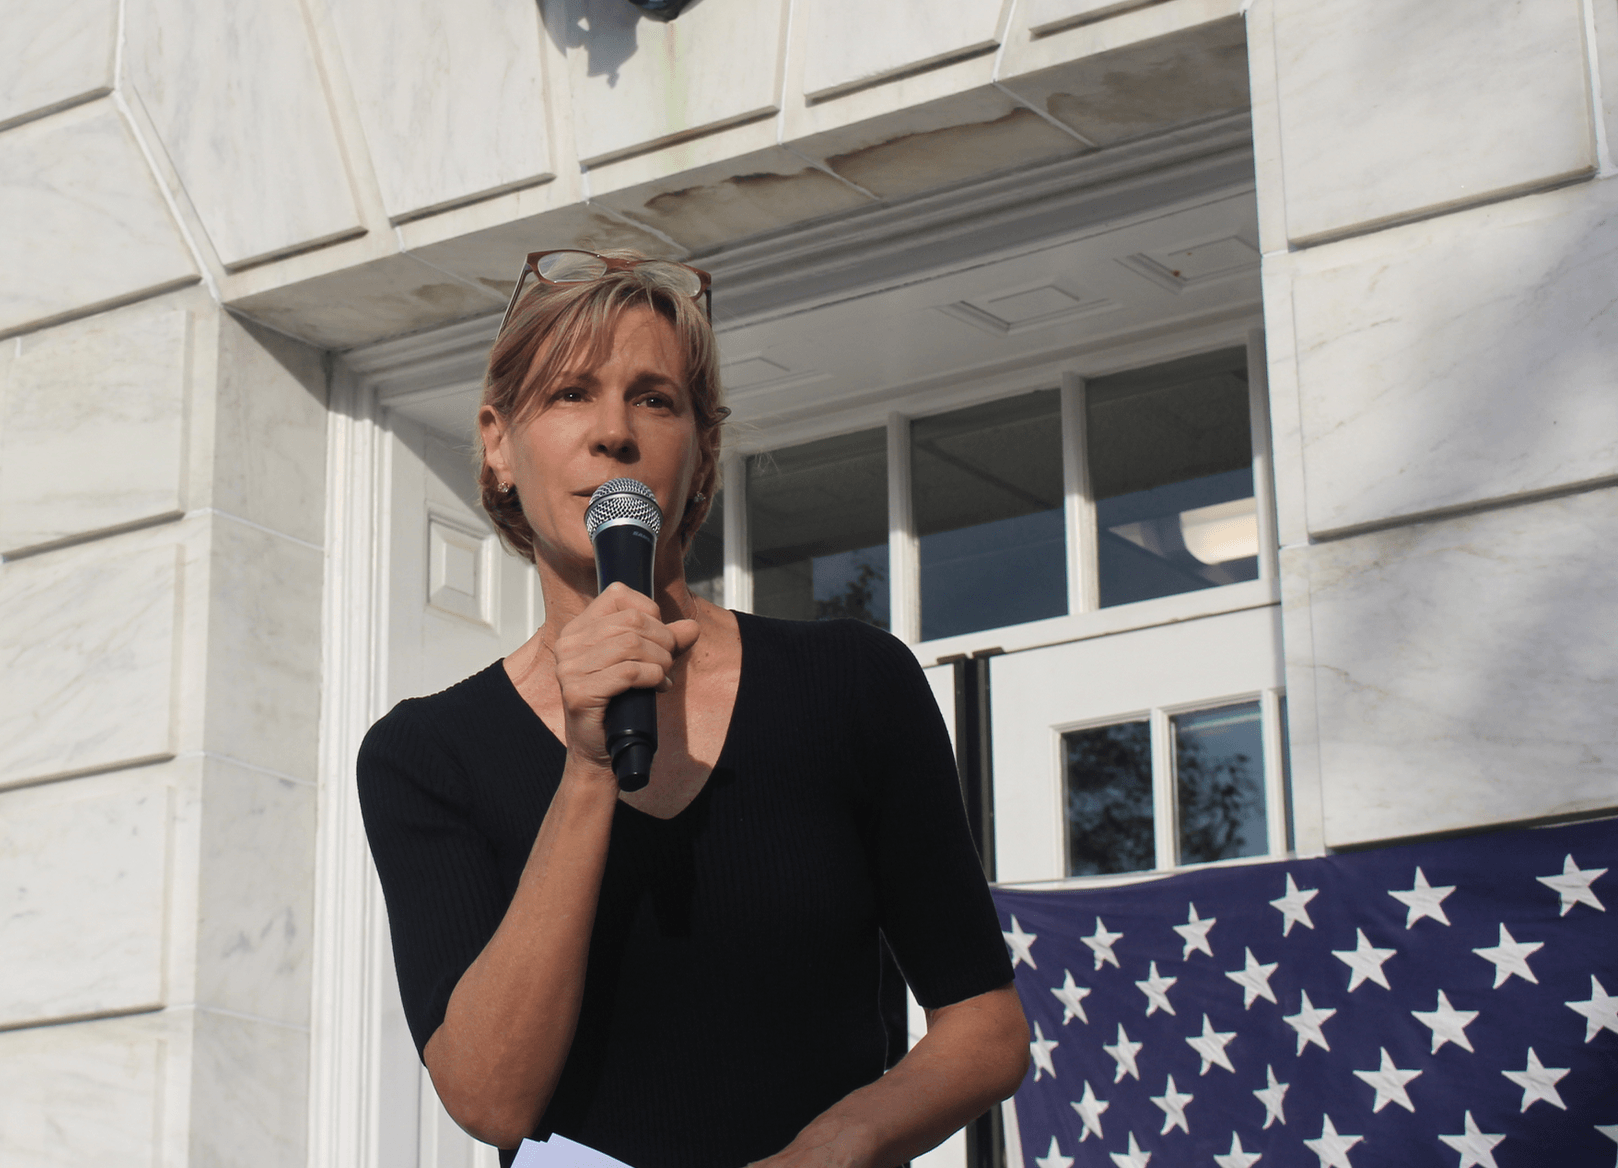 Indivisible Greenwich founder Joanna Swomley addressed the crowd at Greenwich Town Hall on Aug 13, 2017 Photo: Leslie Yager